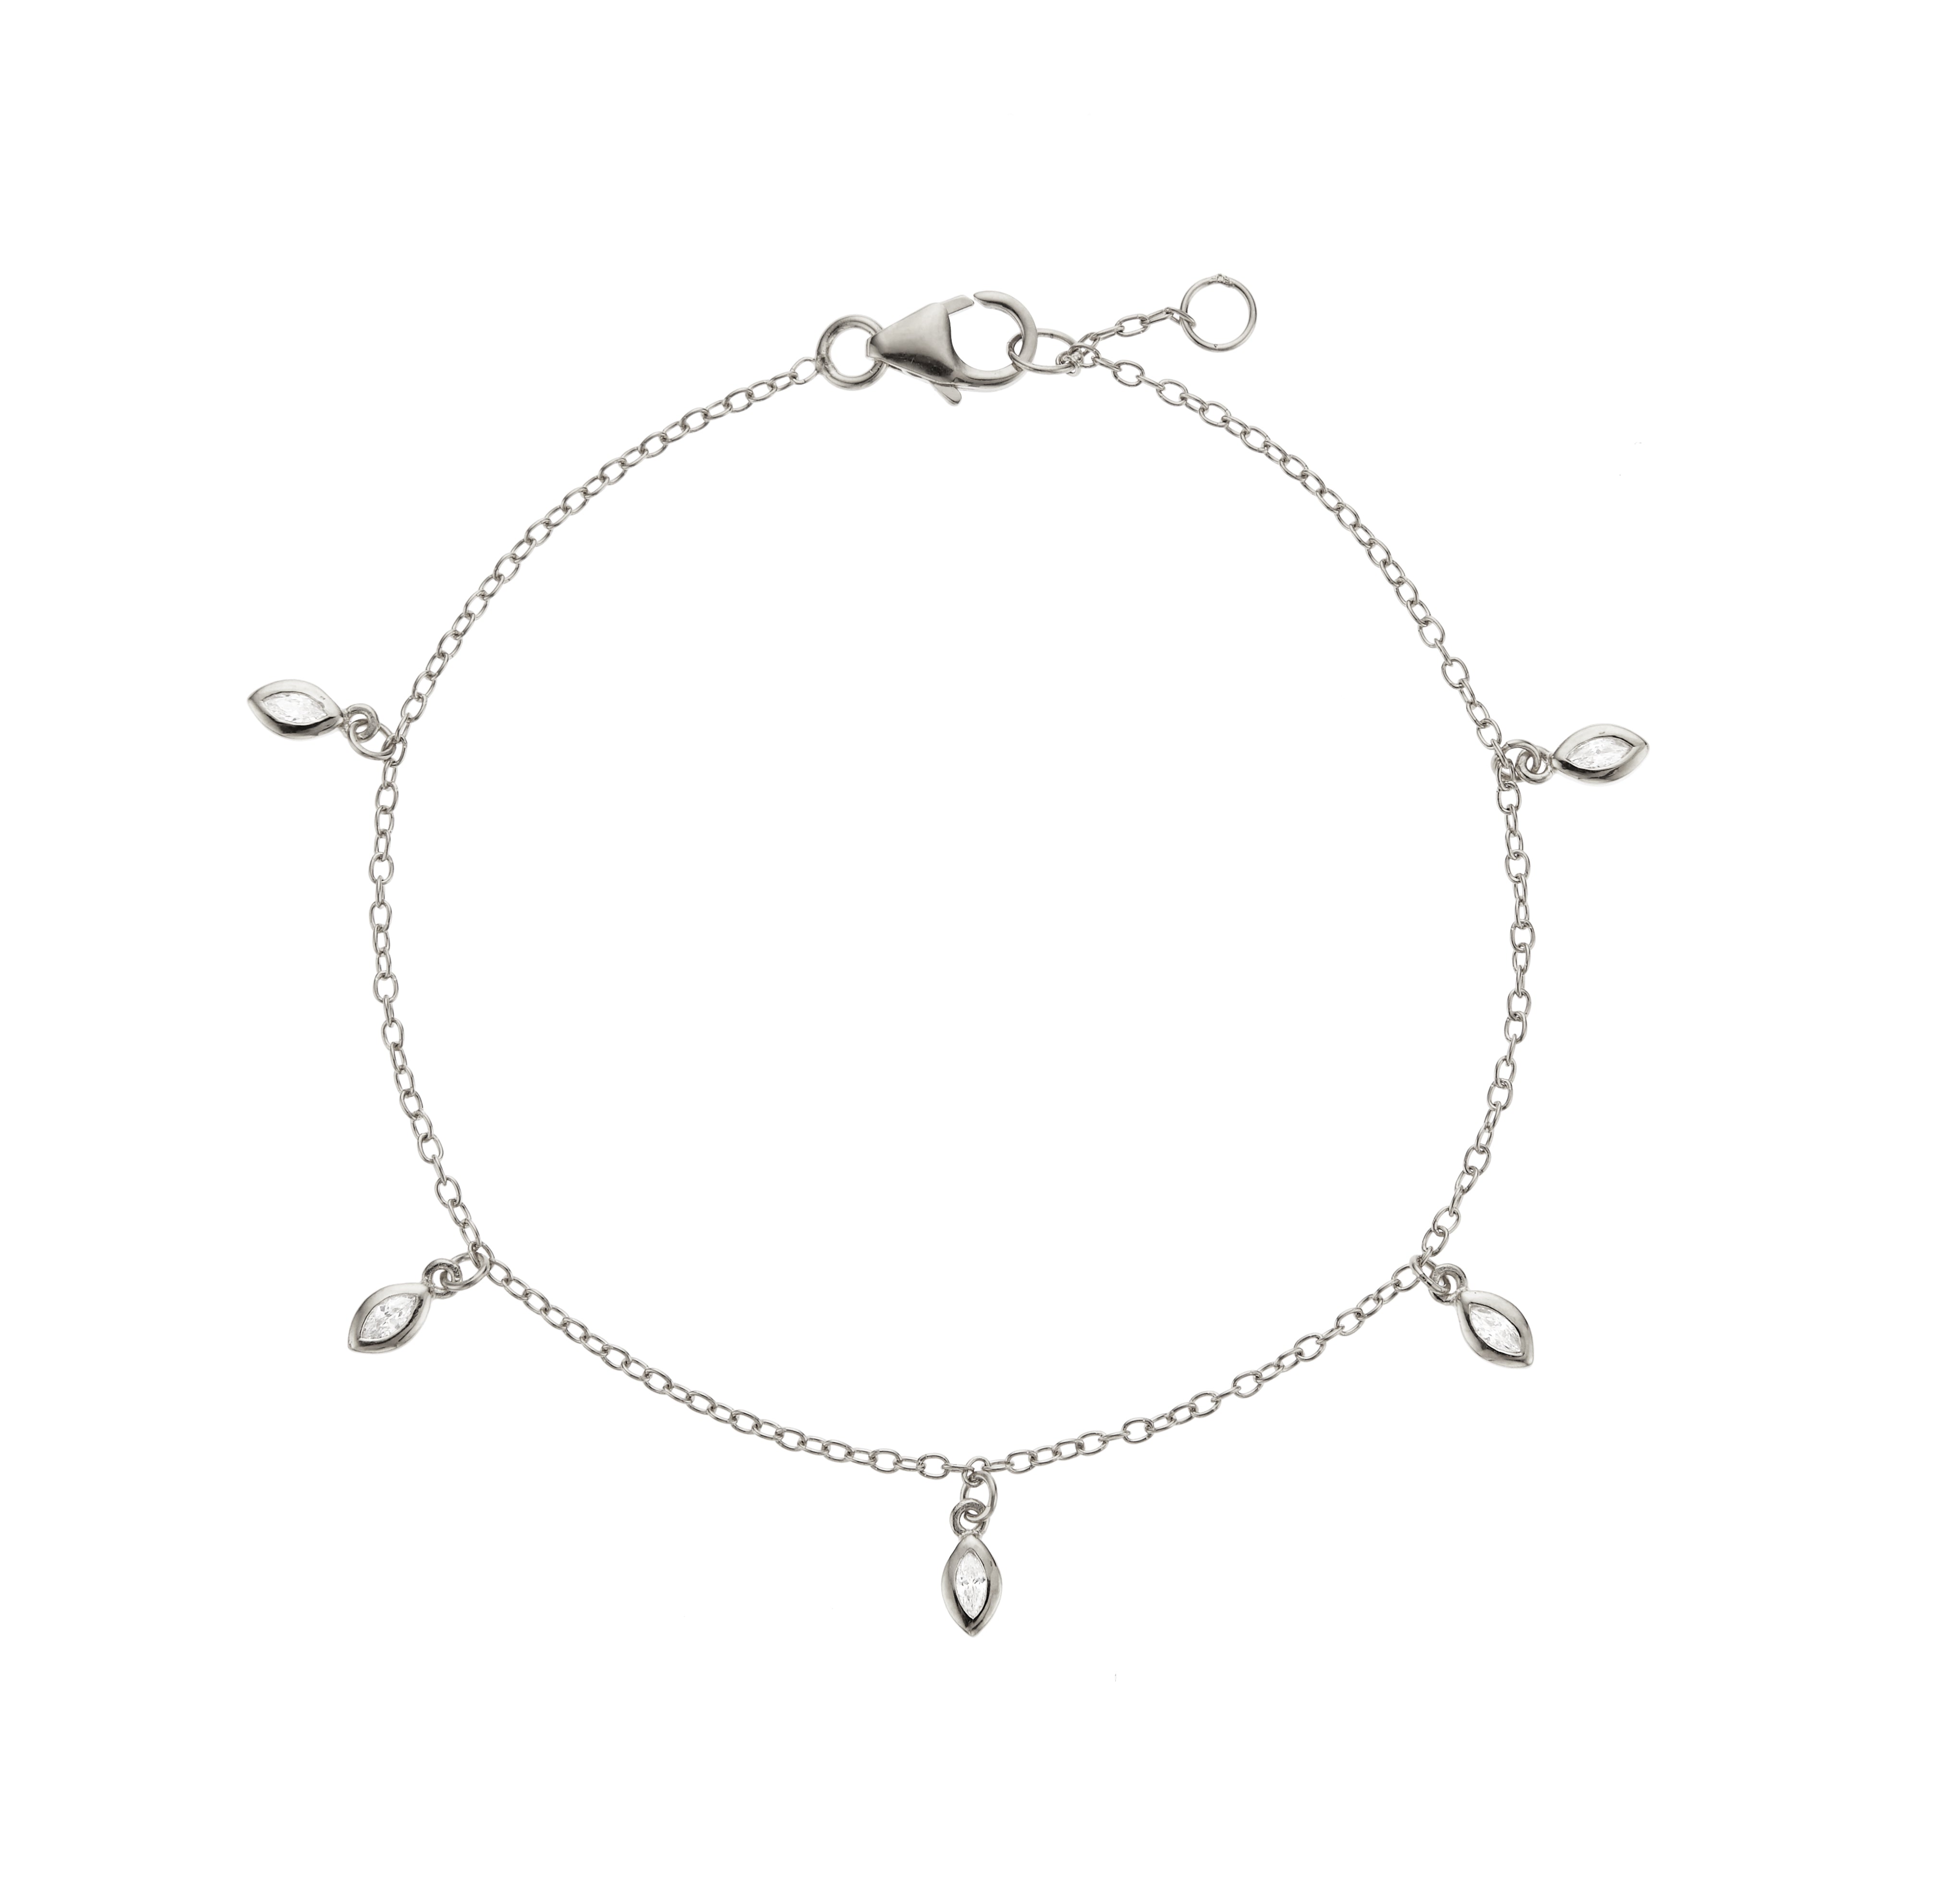 Silver diamond style marquise drop bracelet on a white background